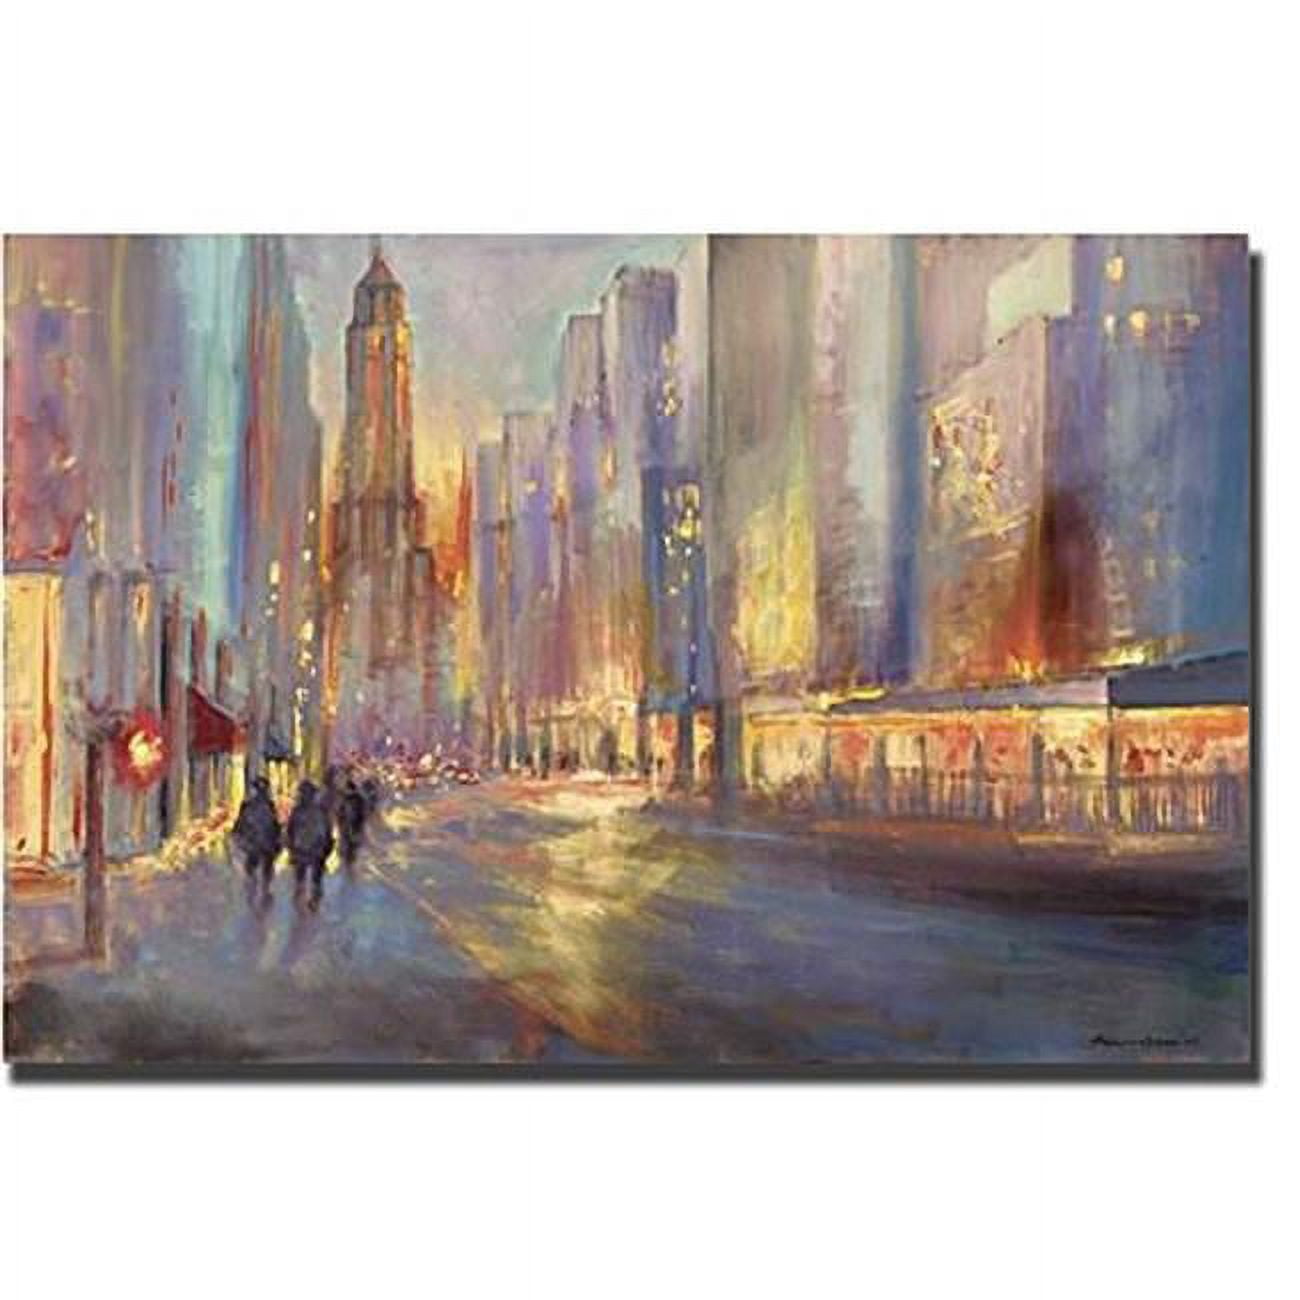 2436f513eg End Of The Day By John Allinson Premium Gallery-wrapped Canvas Giclee Art - Ready To Hang, 24 X 36 X 1.5 In.